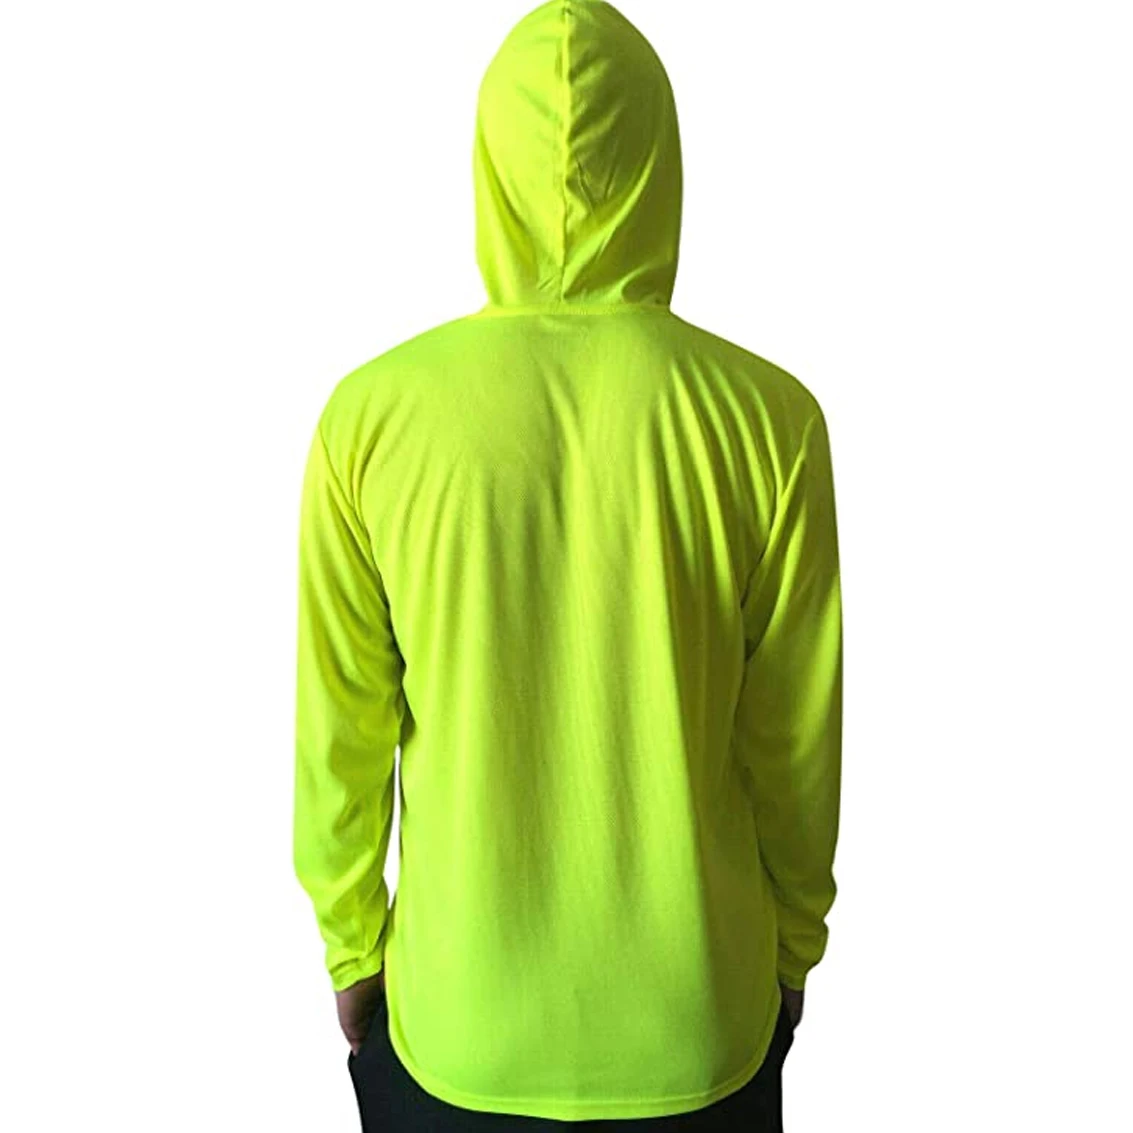 T Shirt With Pocket Safety Shirt With Hi-vis Strip High Visibility ...